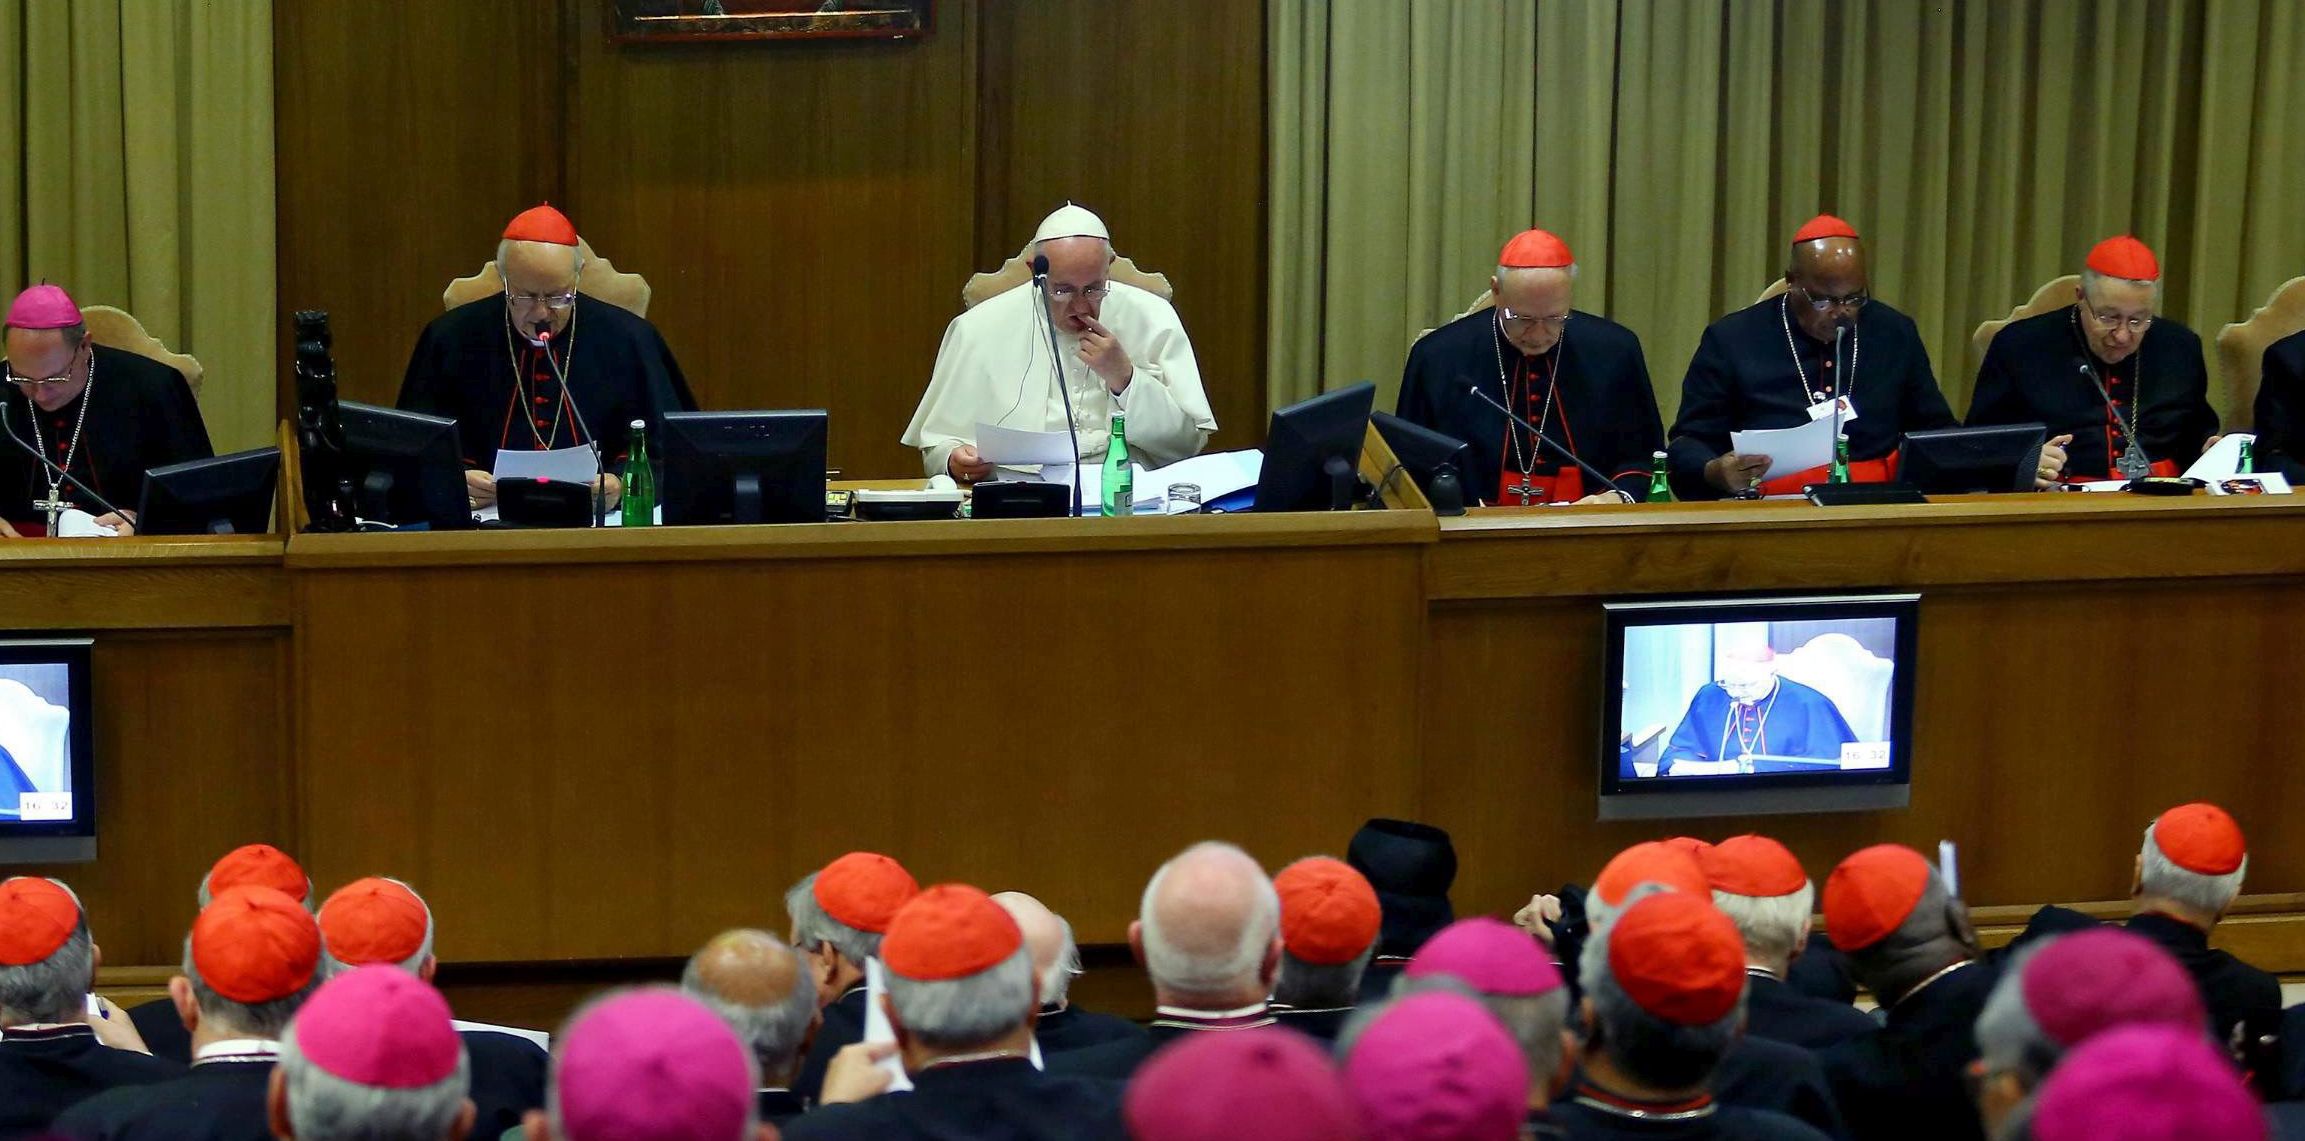 epa04970746 Pope Francis (C) speaks during XVI Ordinary Meeting of the Synod of Bishops at the Synod Hall, Vatican City, 09 October 2015. Nearly 300 cardinals, bishops and prelates from around the world were debating the controversial question of whether the Catholic Church should soften its stance towards divorcees and homosexuals. The summit that ends October 25 and is known as the synod, started 04 October with a mass in St Peter's Cathedral.  EPA/FABIO CAMPANA